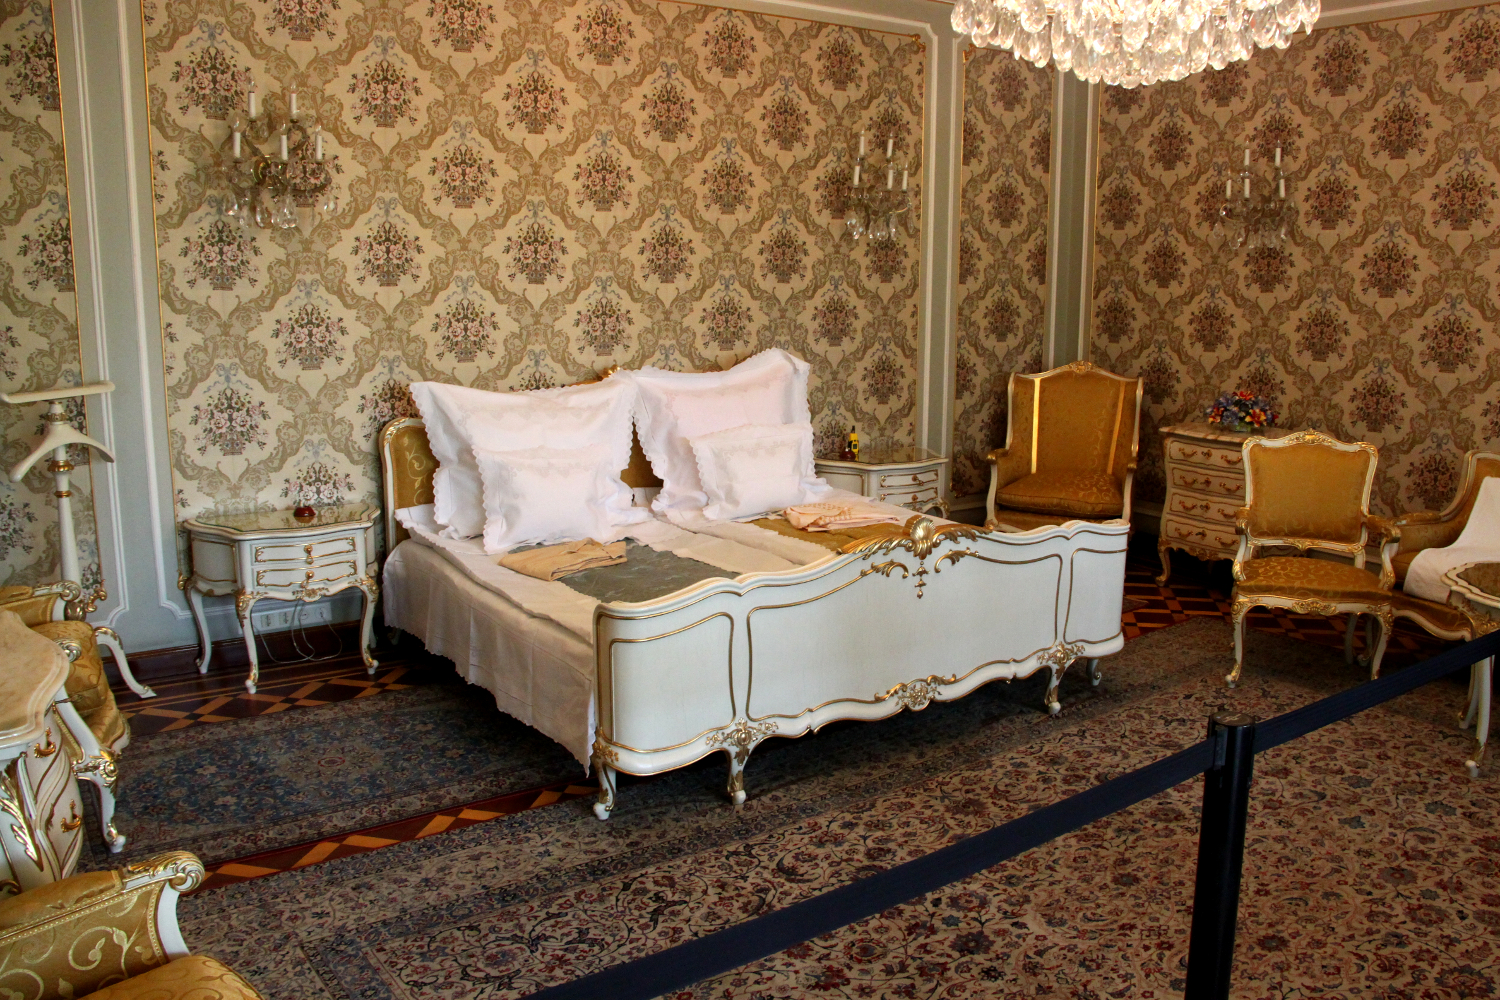 Primaverii (Spring) Palace, Ceausescu’s private residence - Nicolae and Elena Ceausescu's bedroom - they have the original sheets 